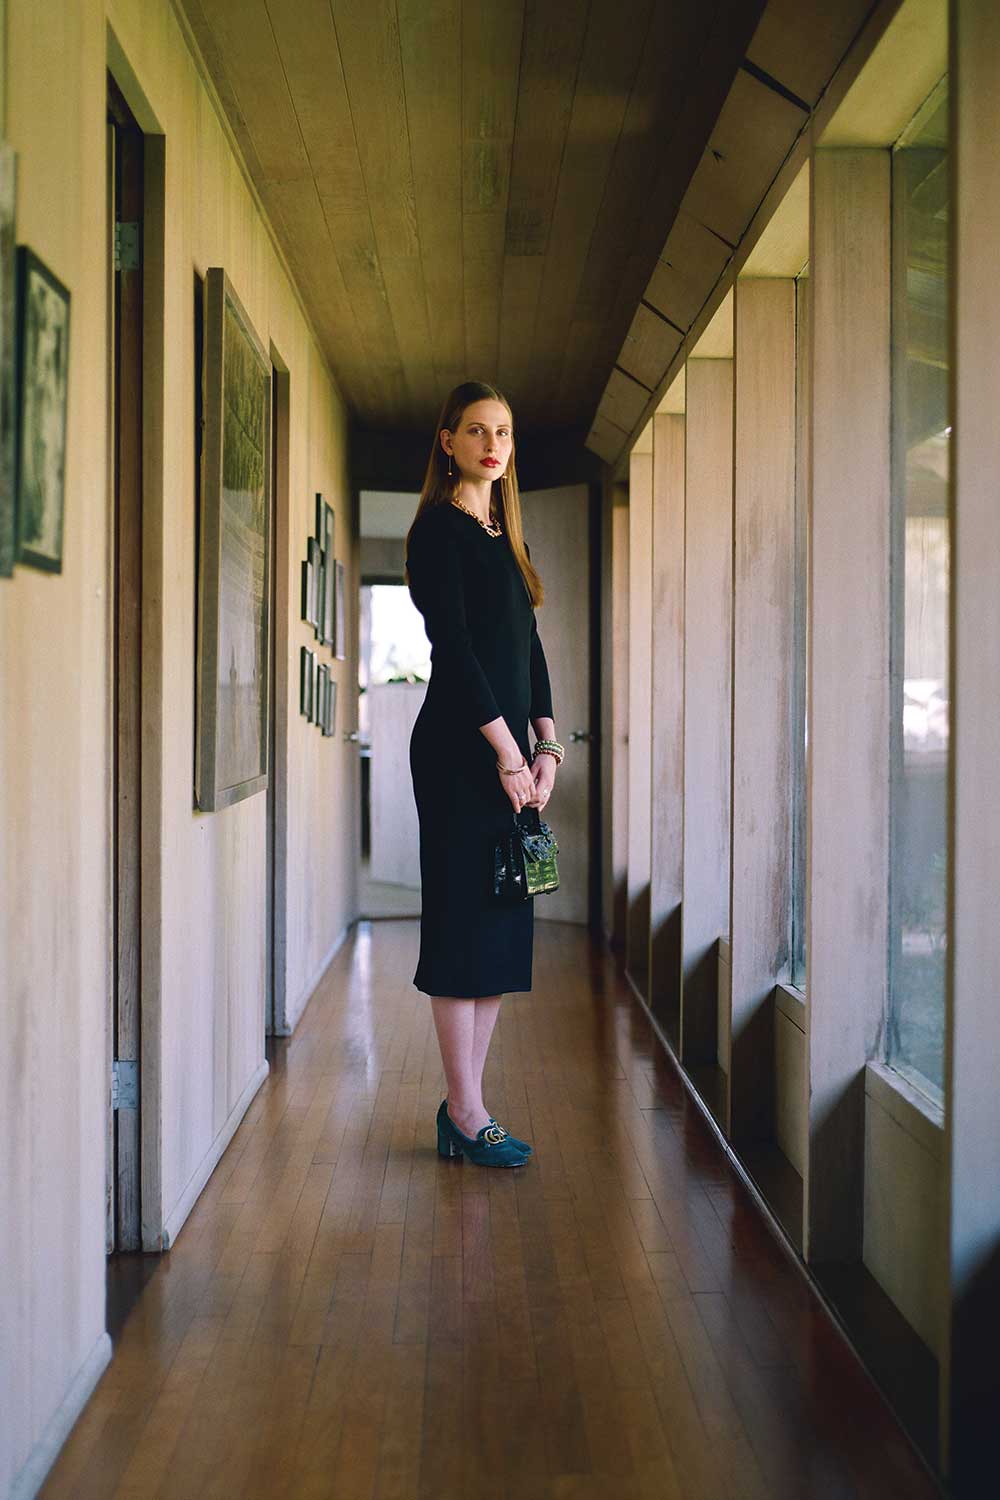 Woman in black dress standing in hallway holding small bag